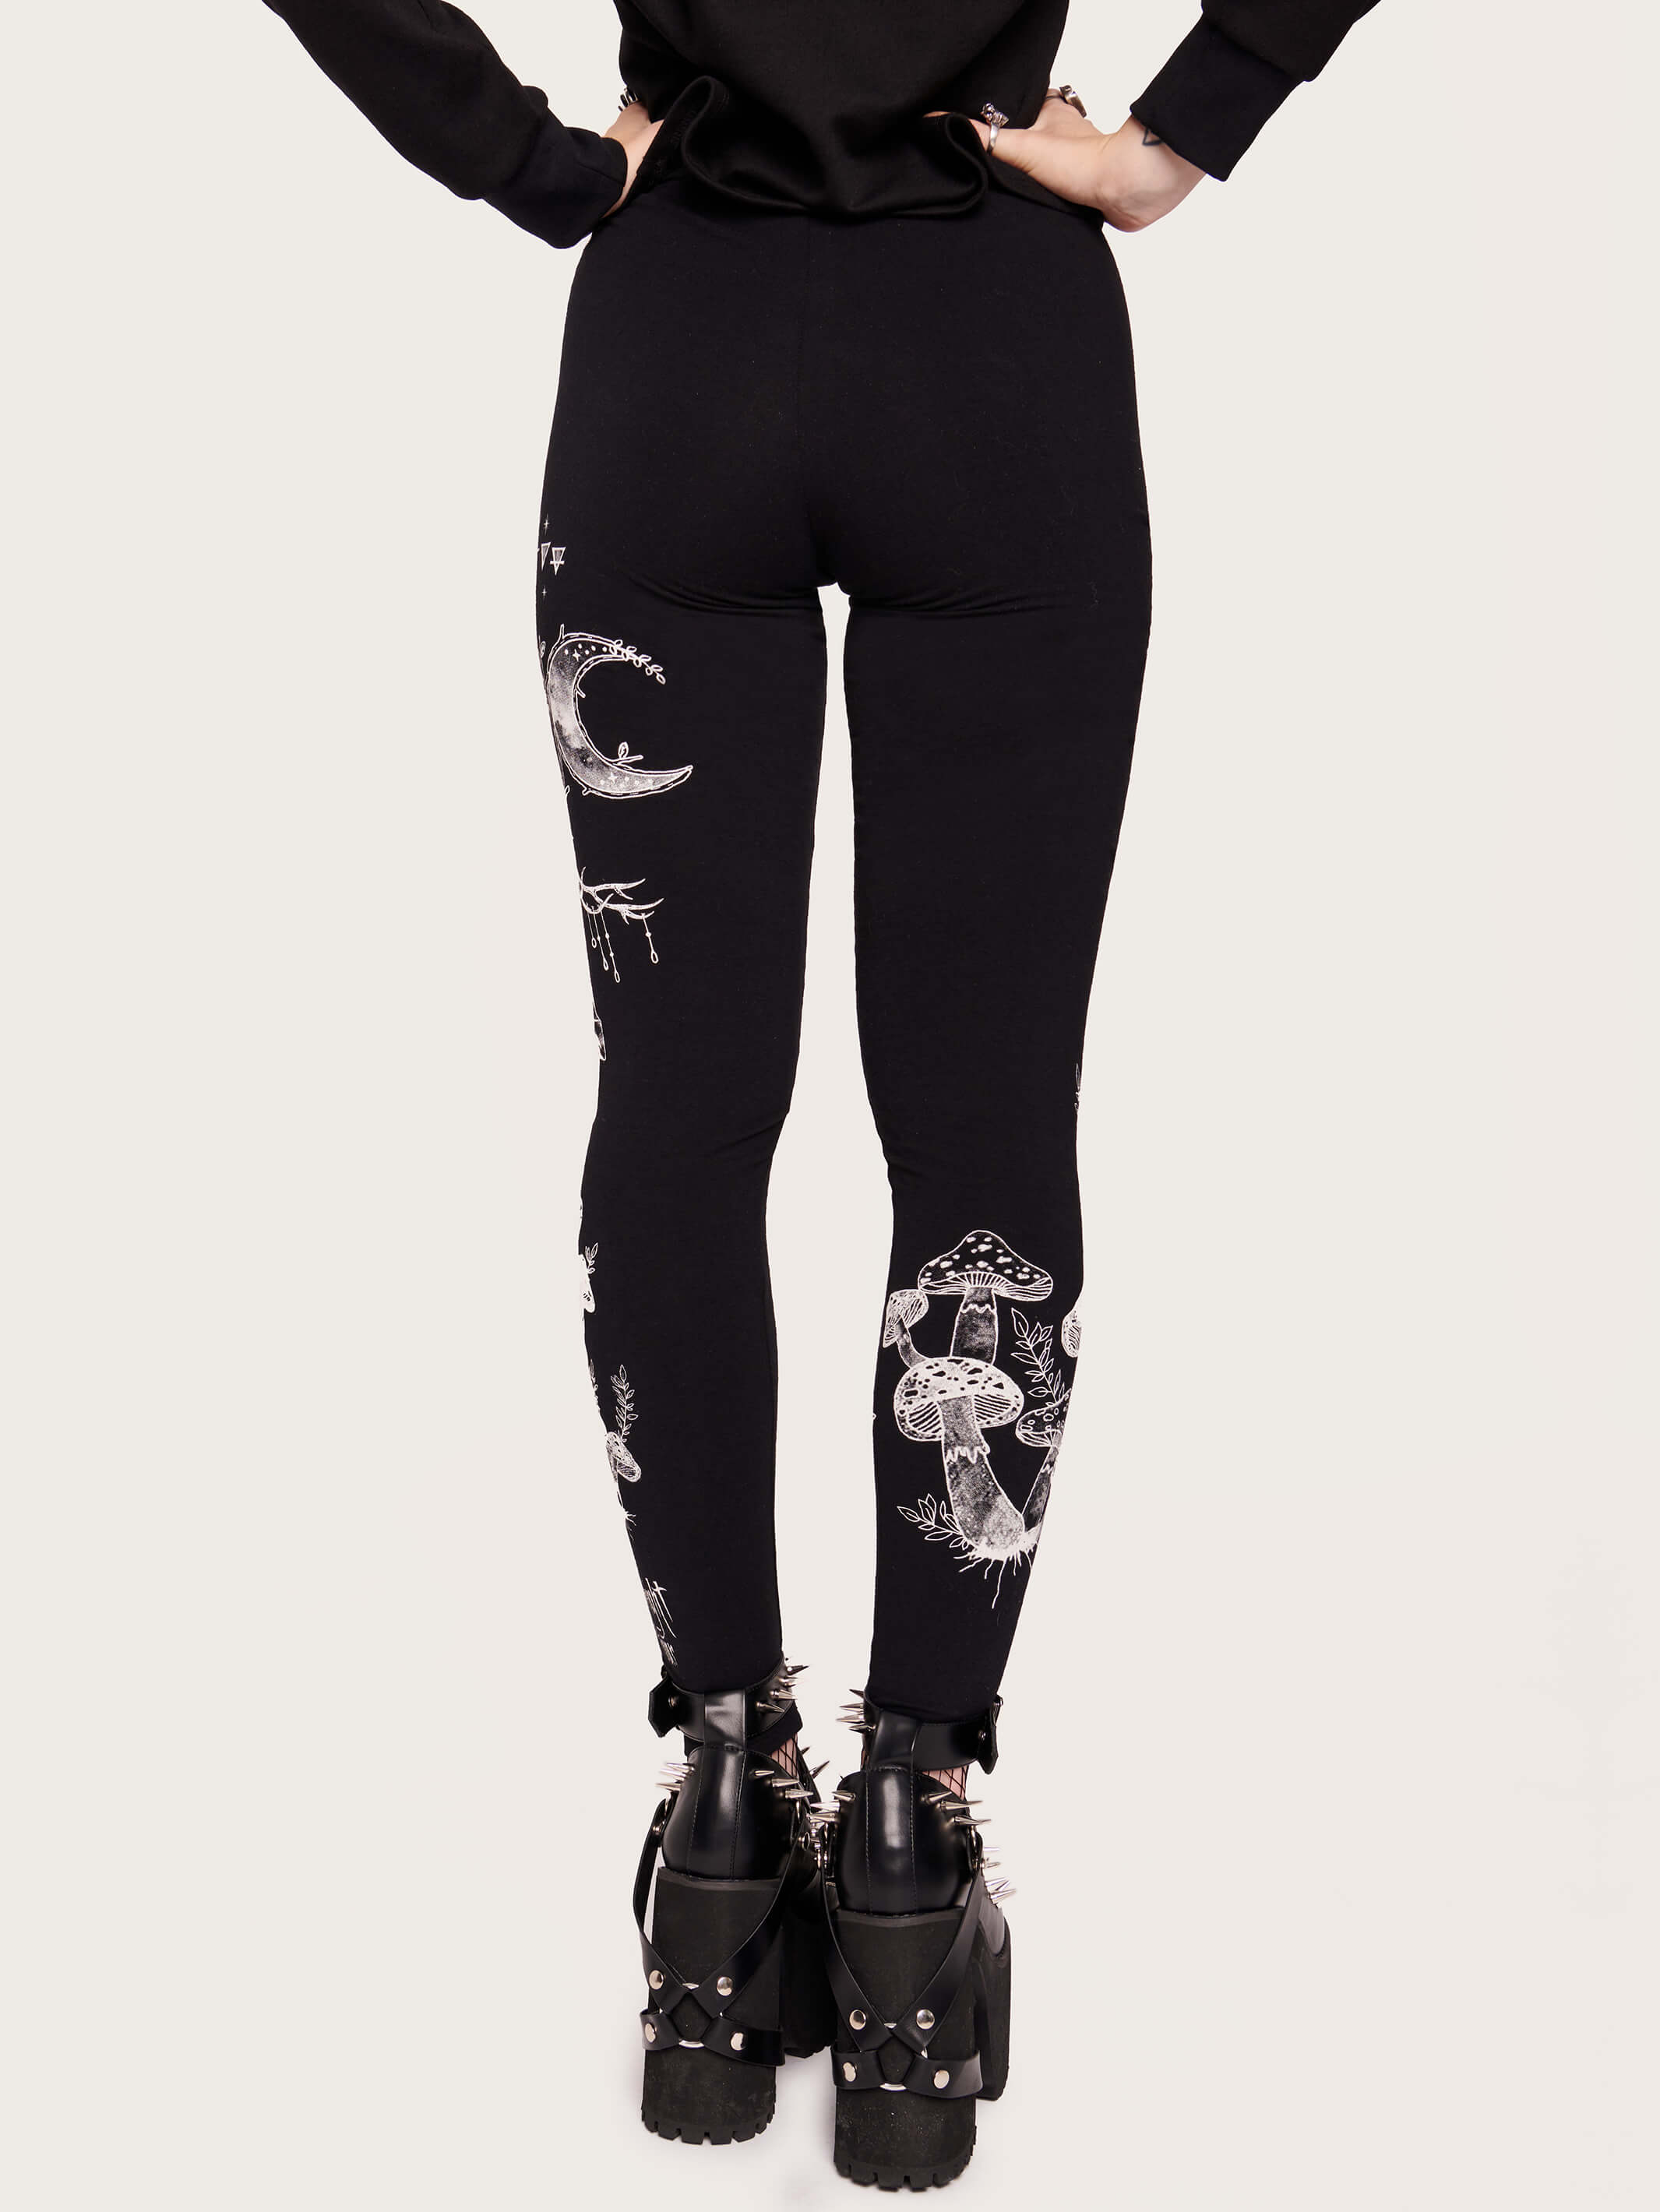 Punk Goth Clothes  Gothic Punk Outfits by Midnight Hour Tagged goth  leggings